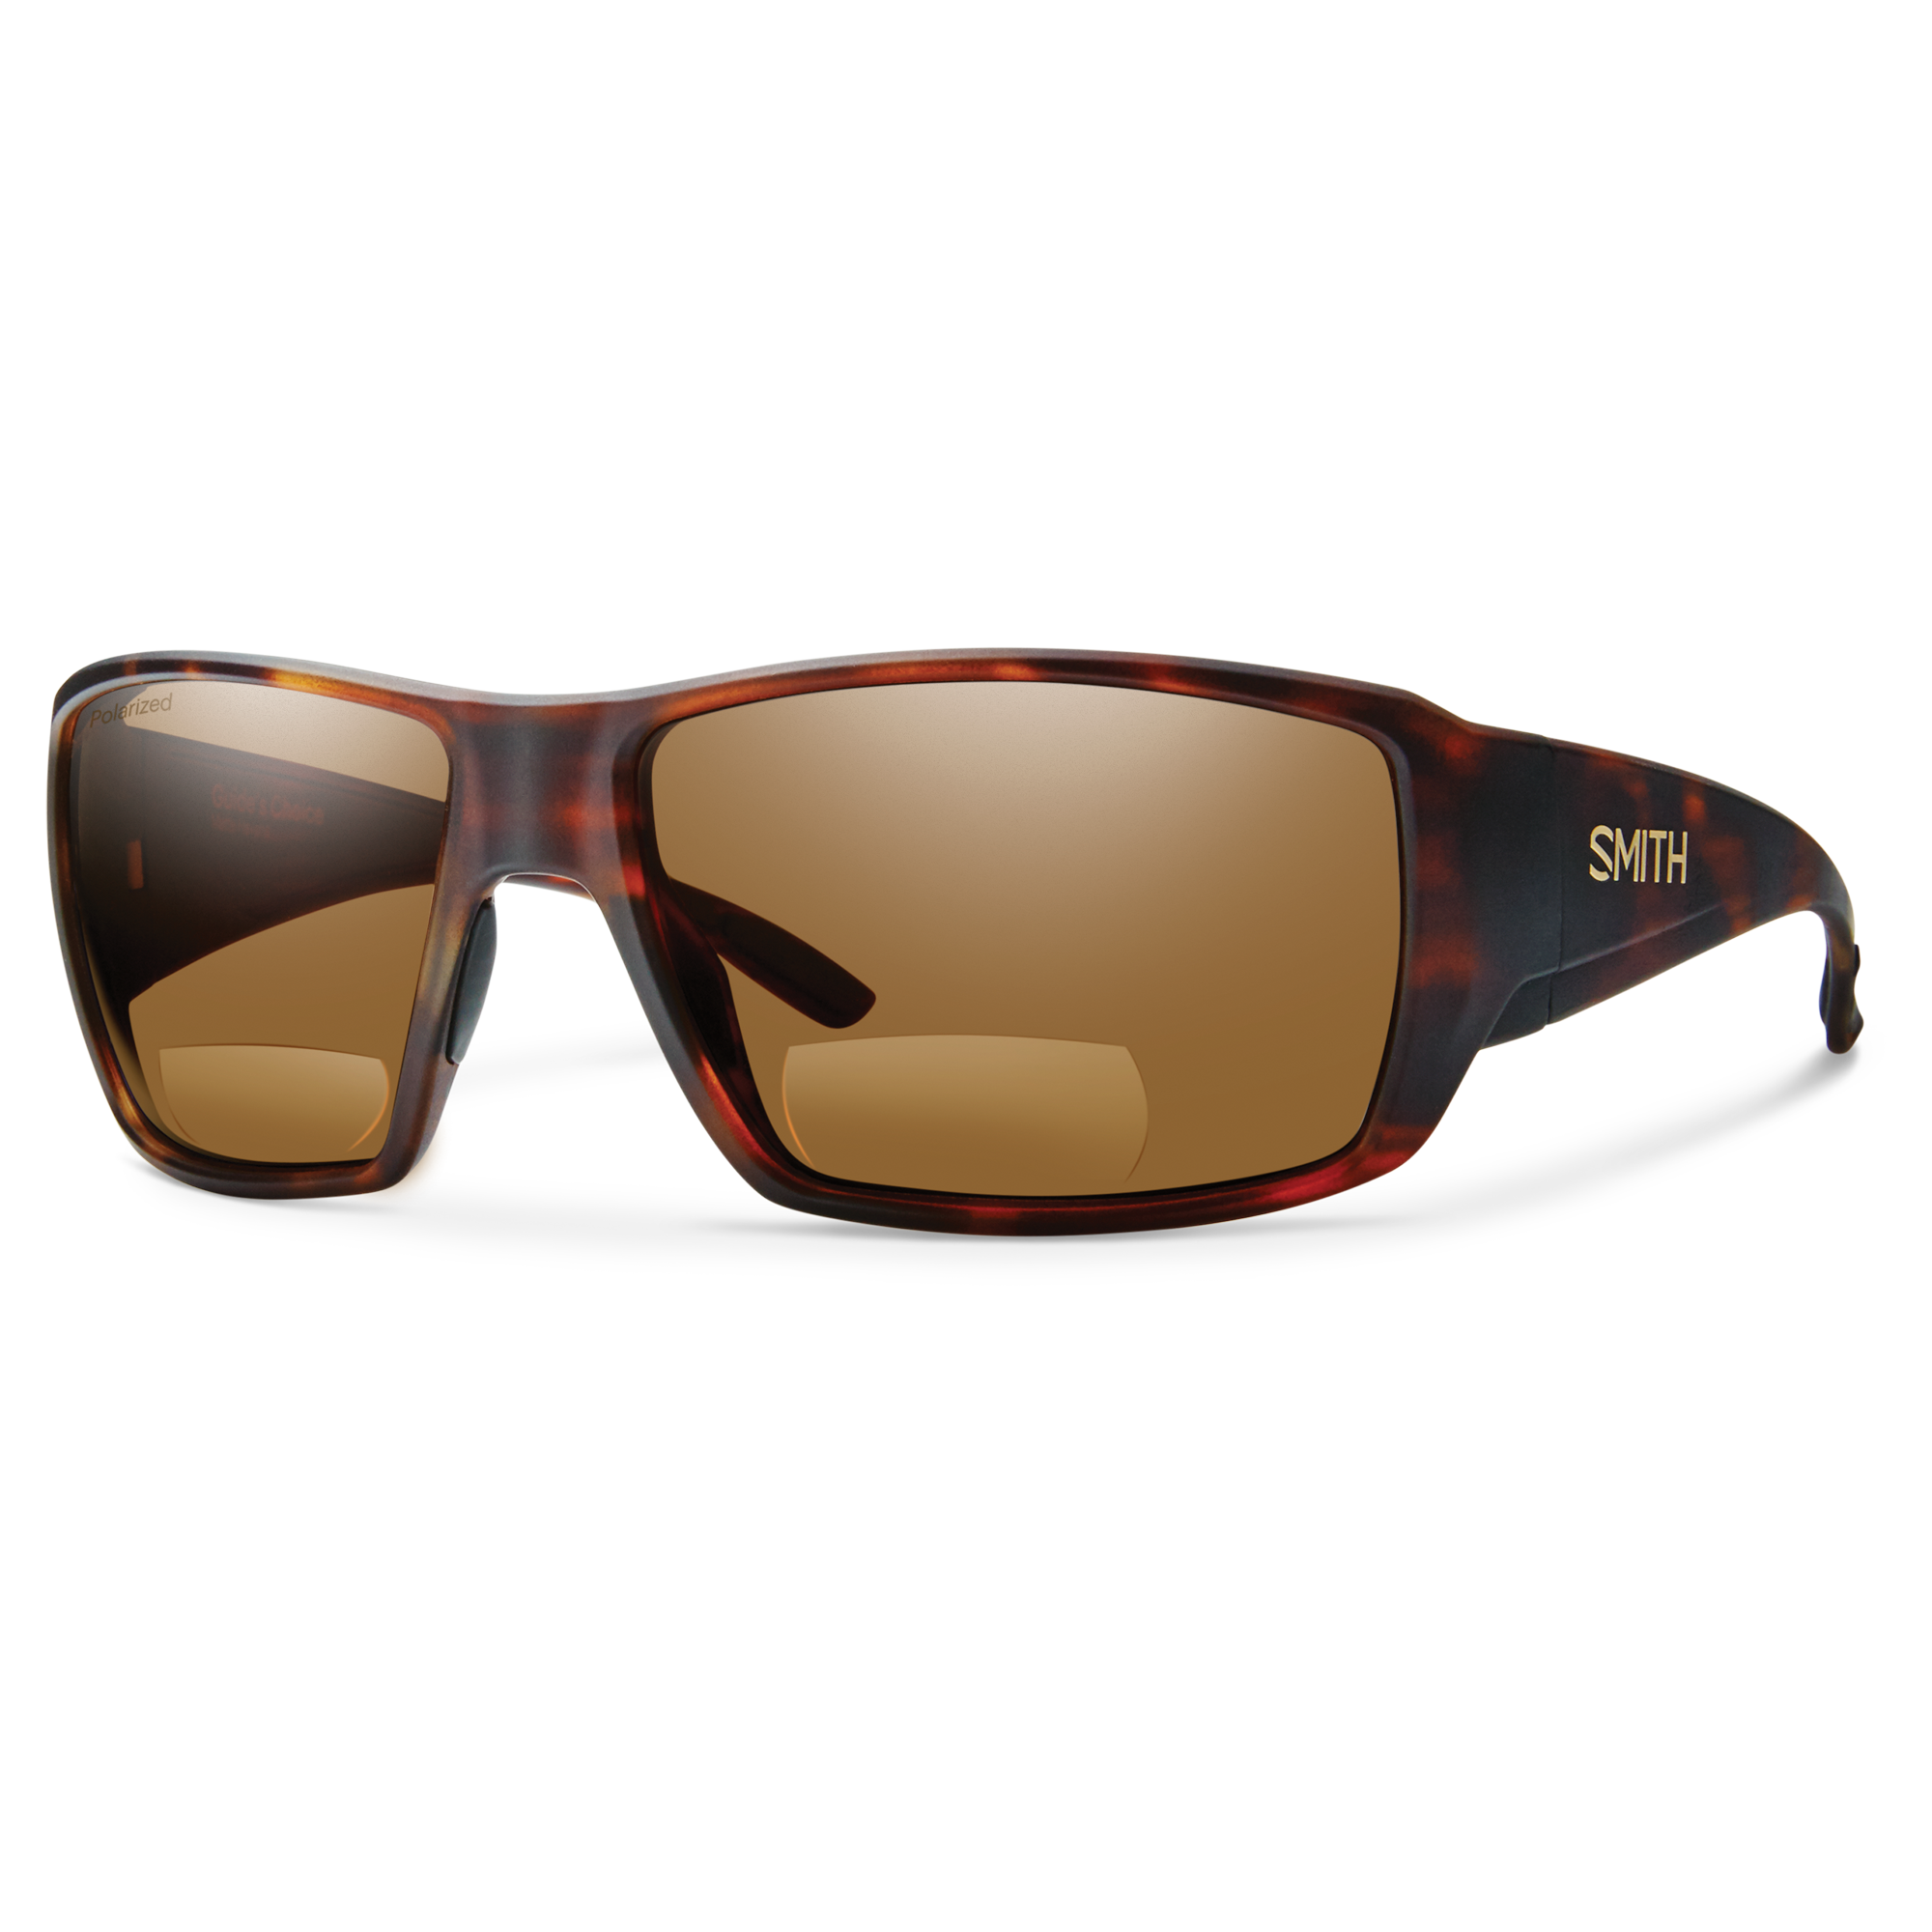 Smith Guides Choice Bifocal Sunglasses